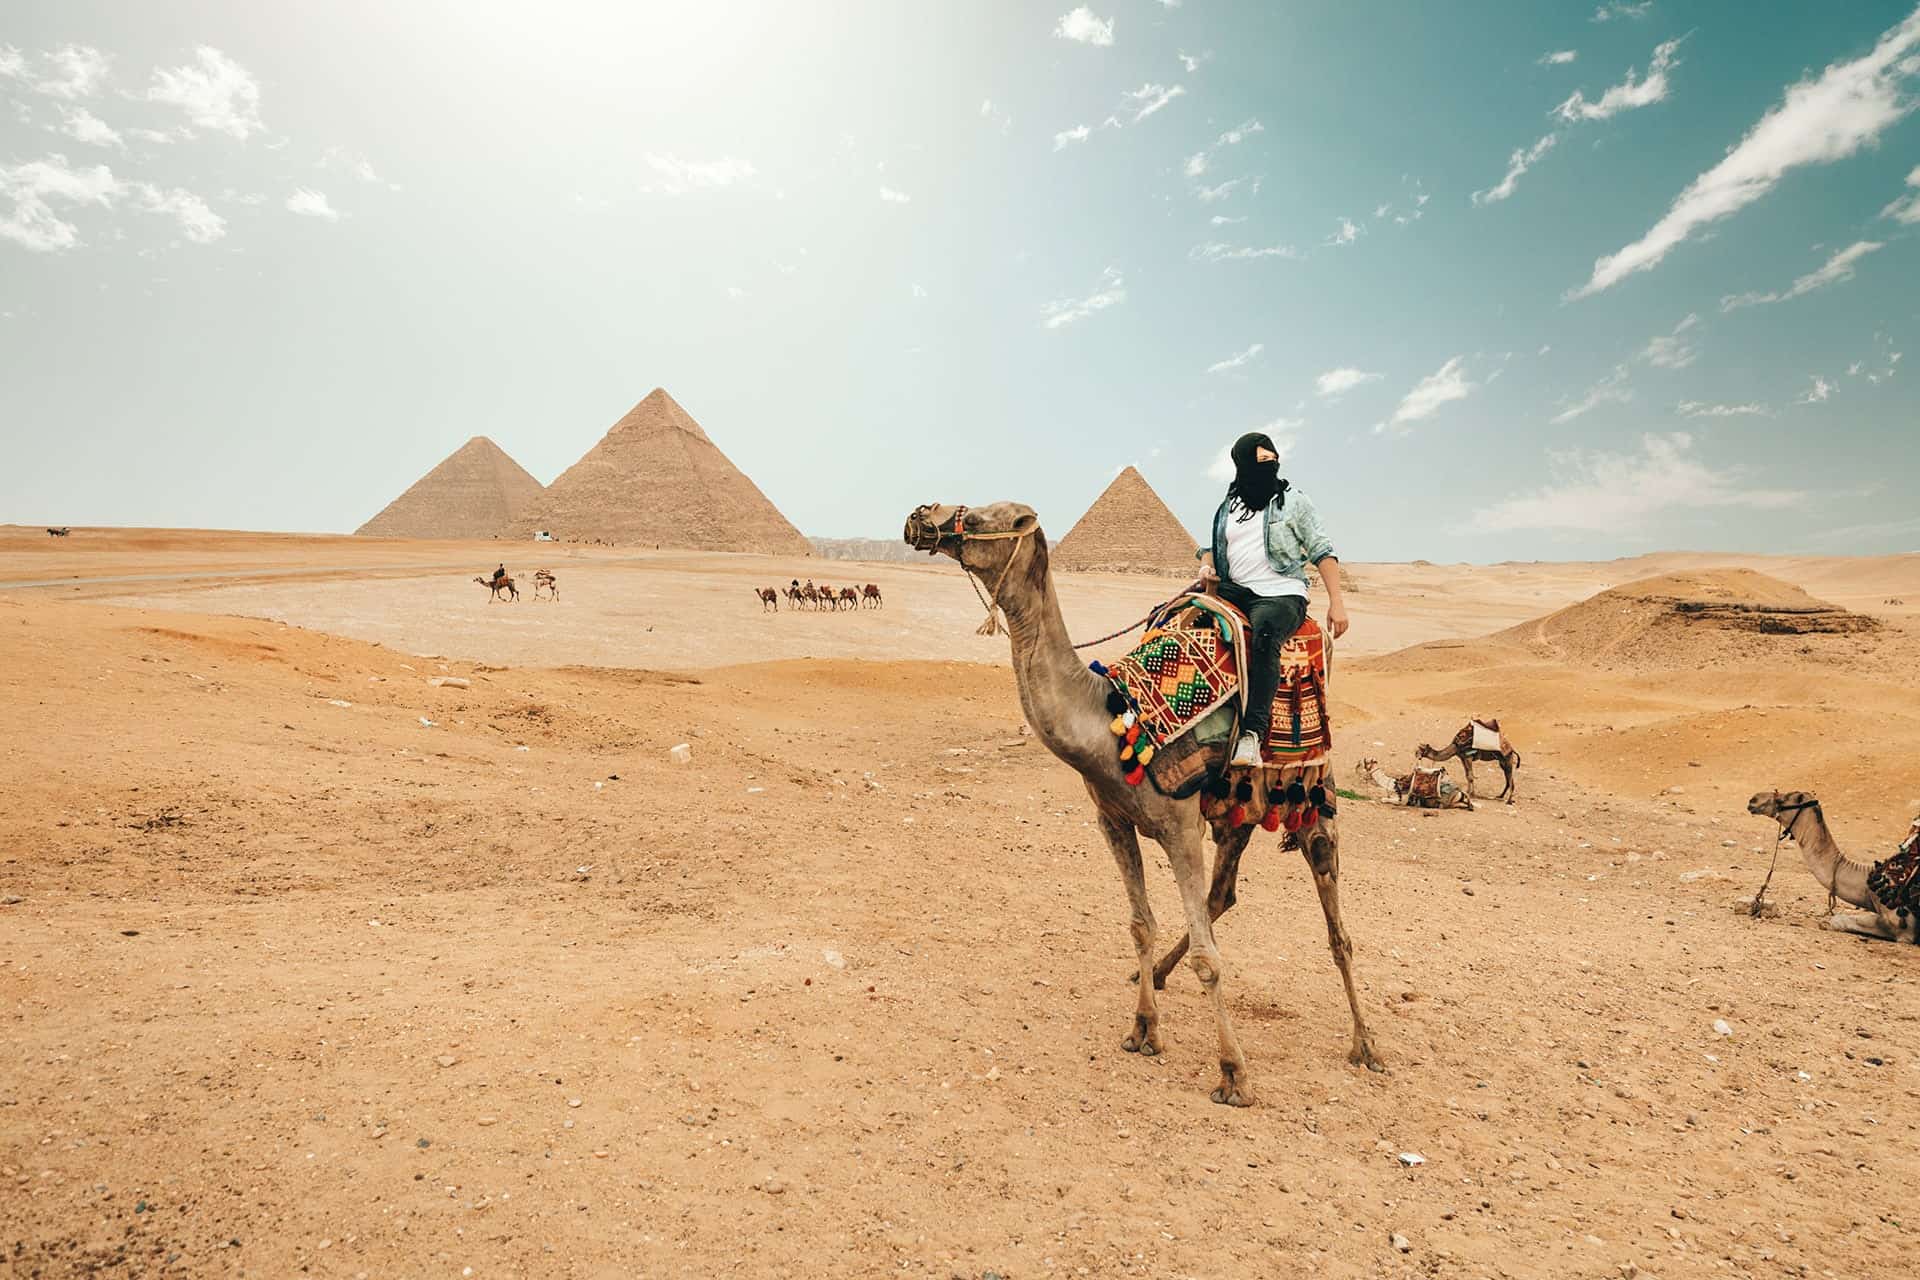 Tourist riding a camel near the pyramids in the desert on their first solo trip.